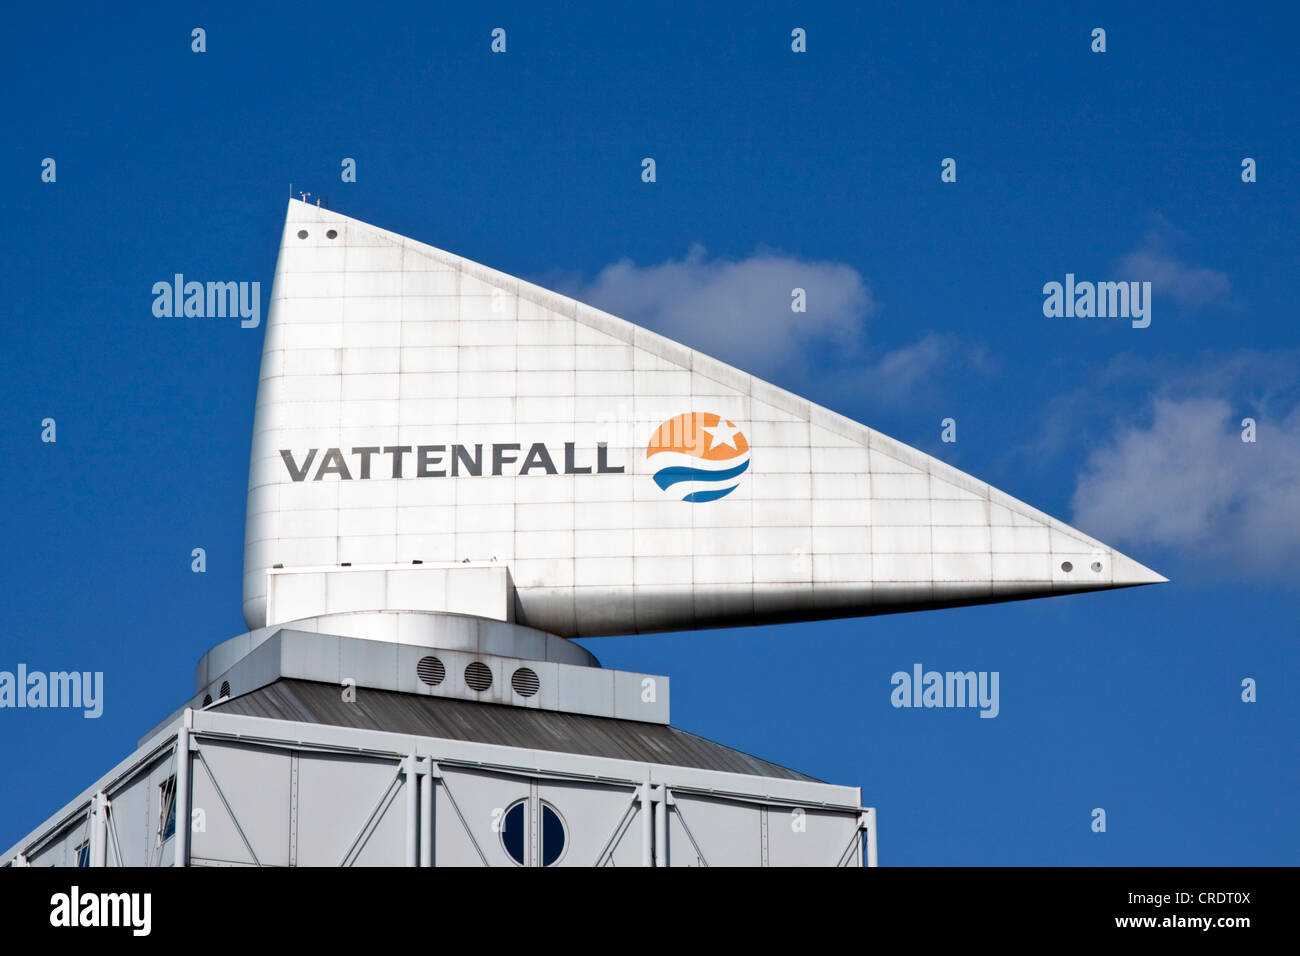 Vattenfall lettering on a building in Berlin, Germany, Europe Stock Photo